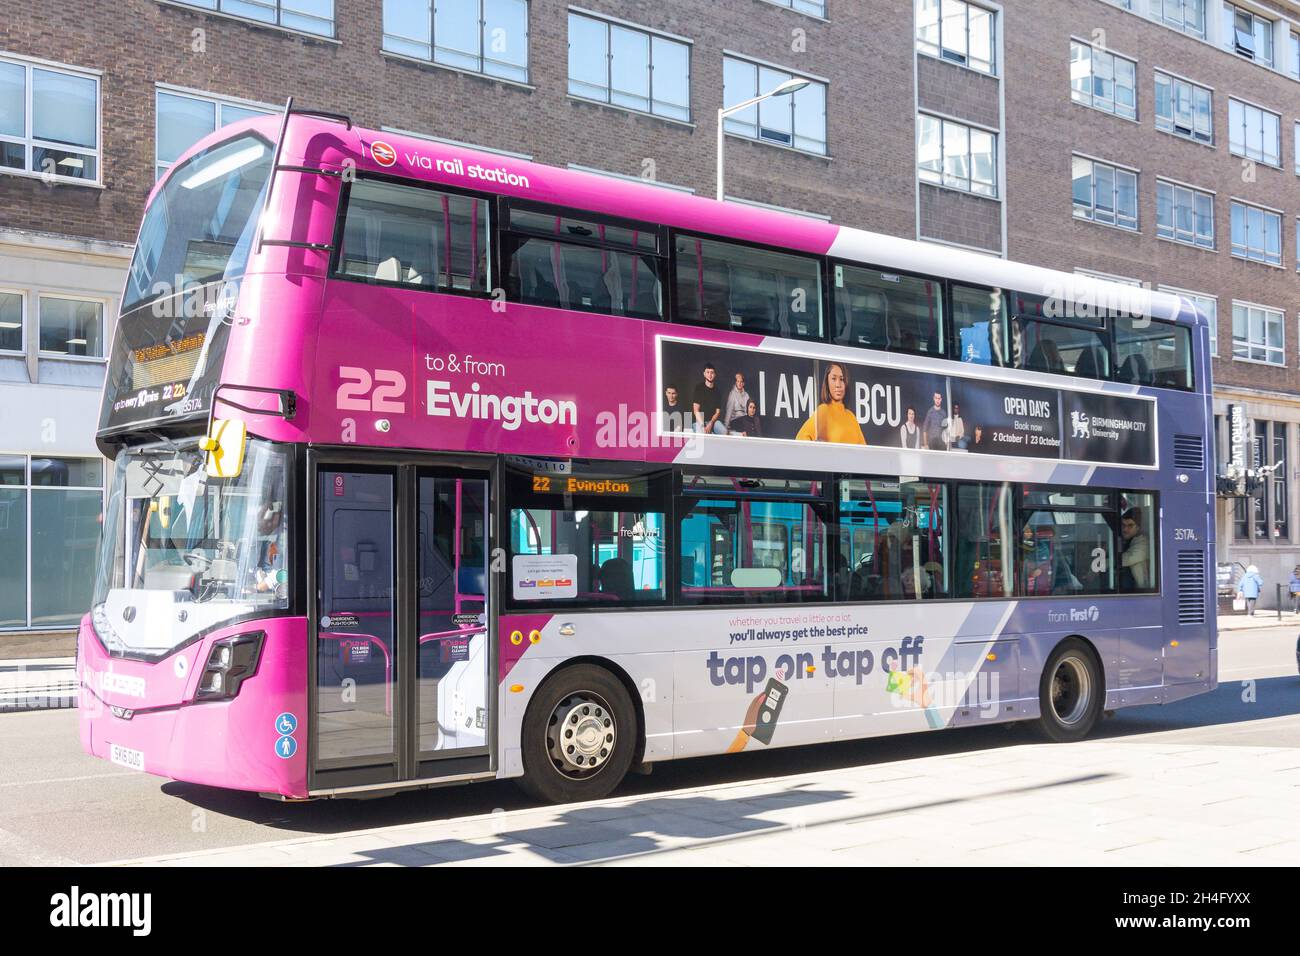 First Bus double-decker bus to Evington, Rutland Street, Cultural Quarter, City of Leicester, Leicestershire, England, United Kingdom Stock Photo